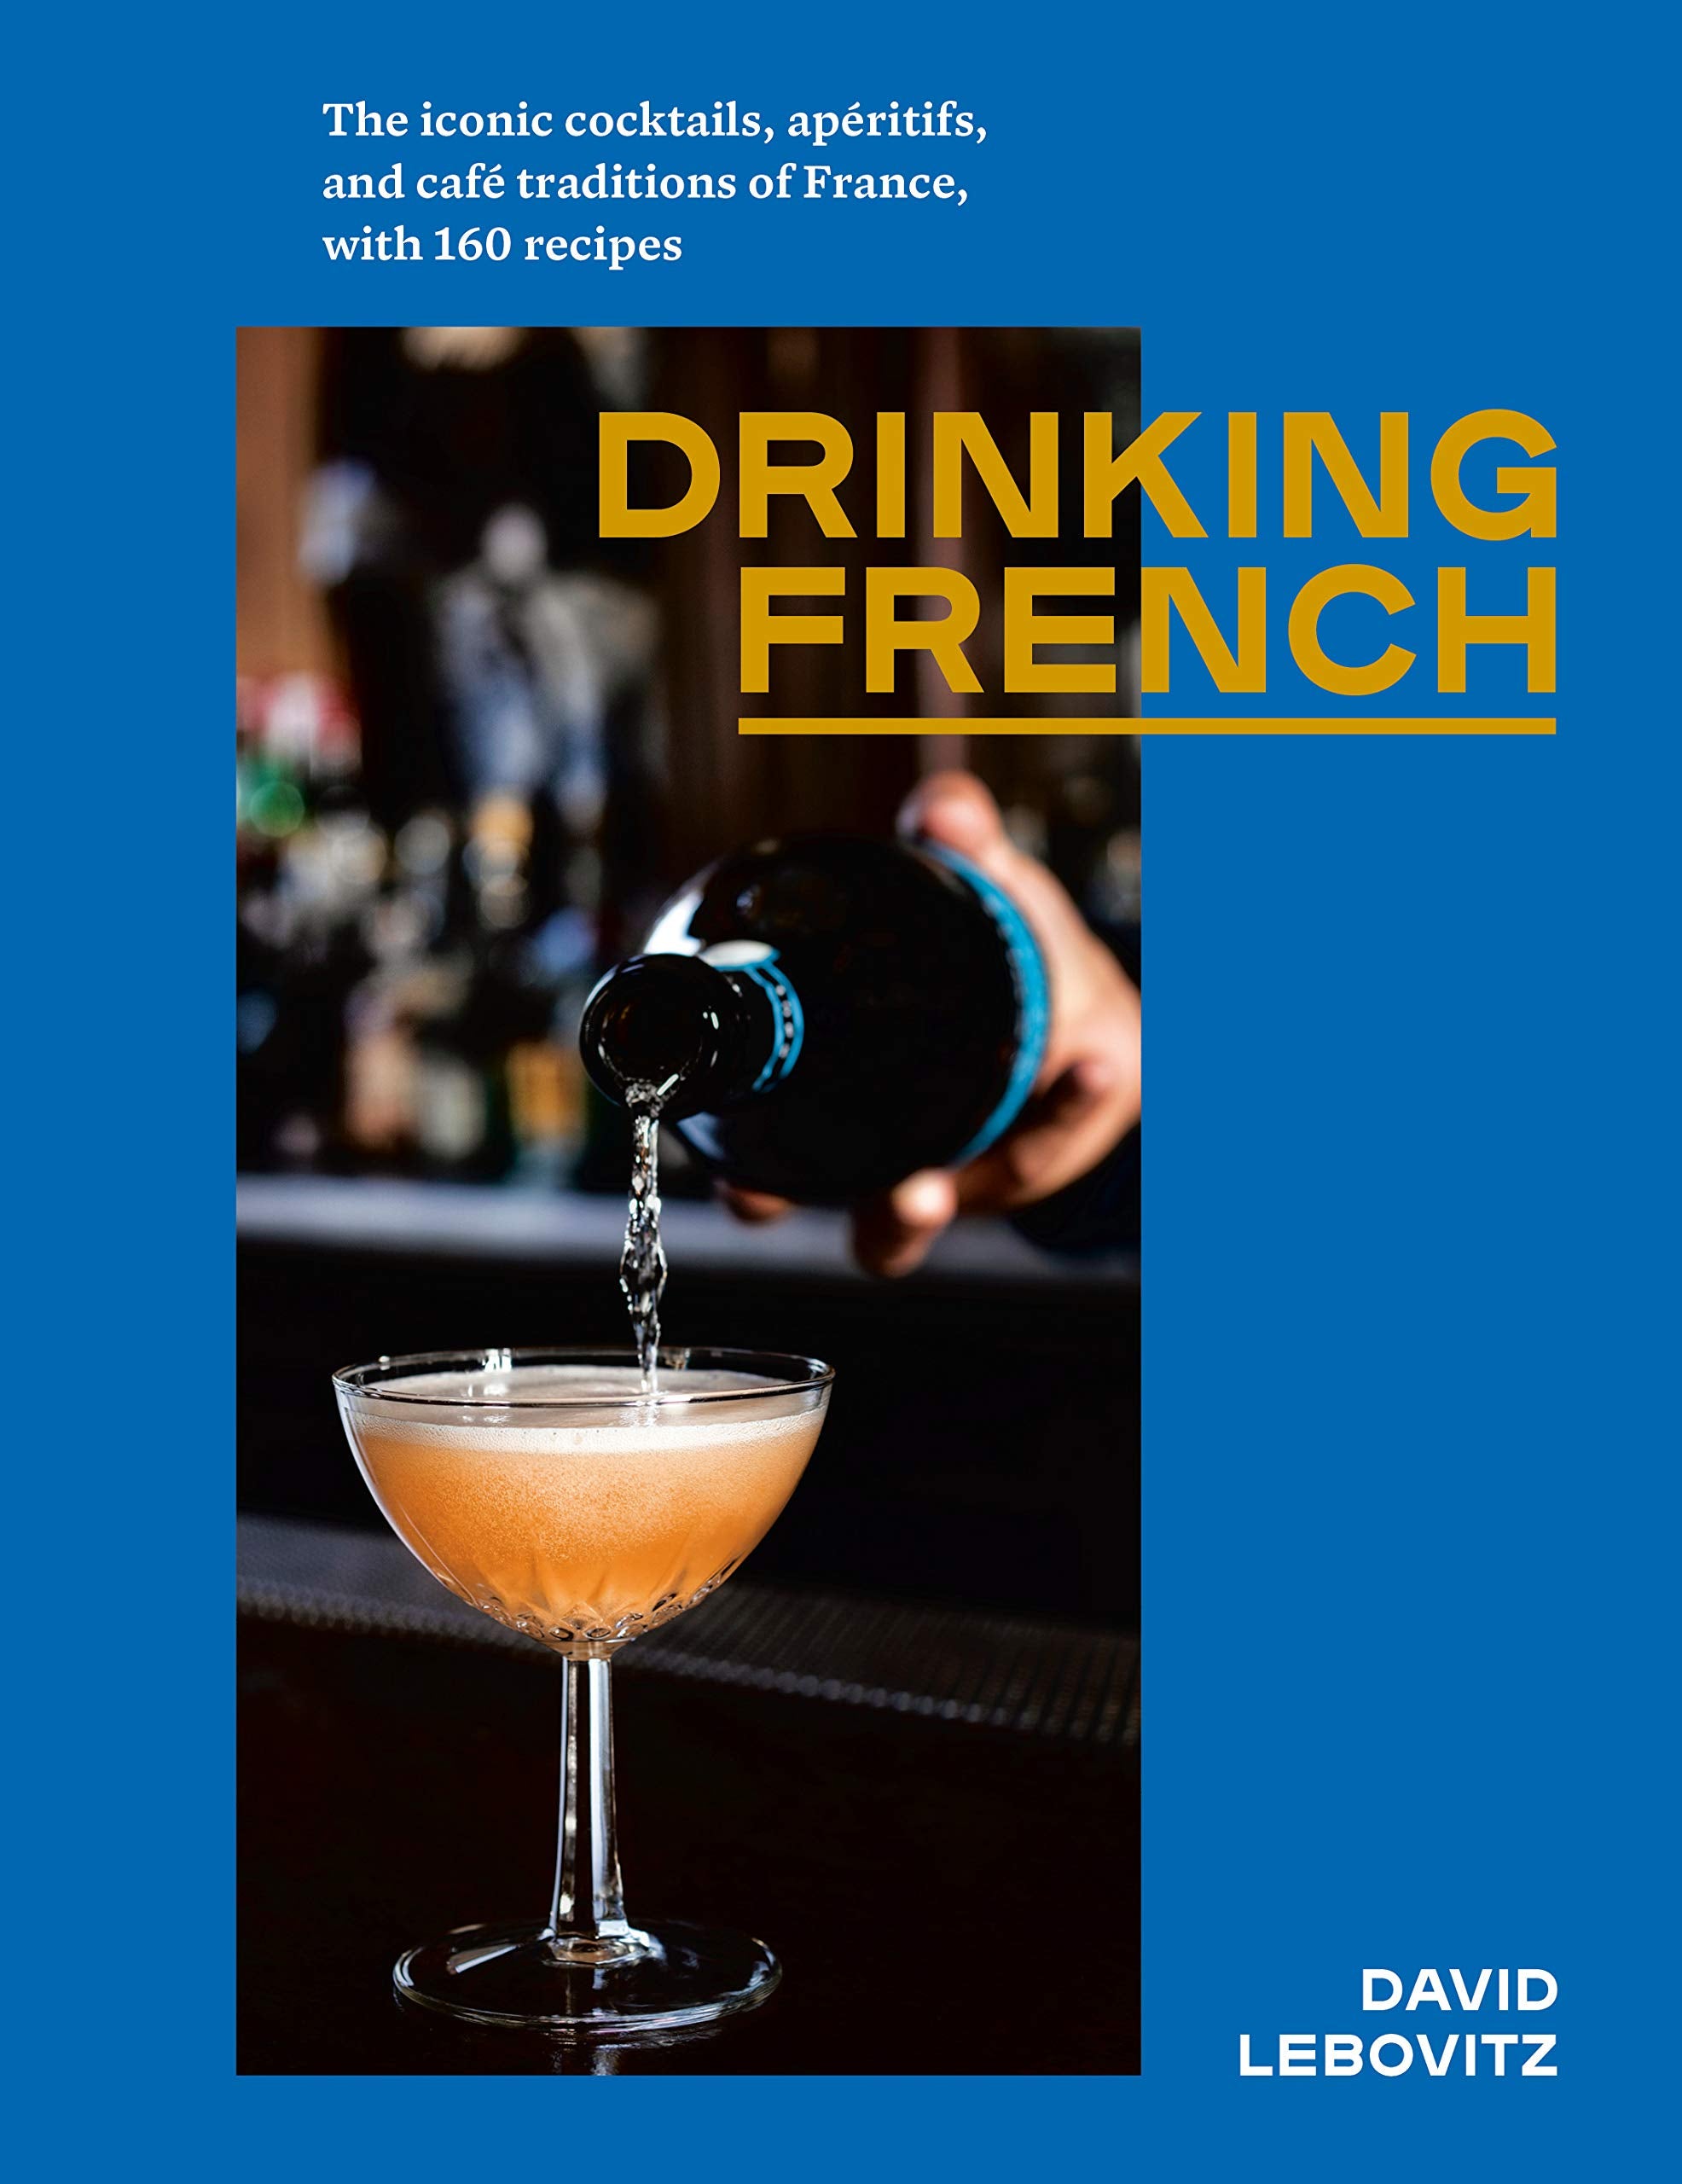 Drinking French: The Iconic Cocktails, Apéritifs, and Café Traditions of France, with 160 Recipes *SIGNED* (David Lebovitz)